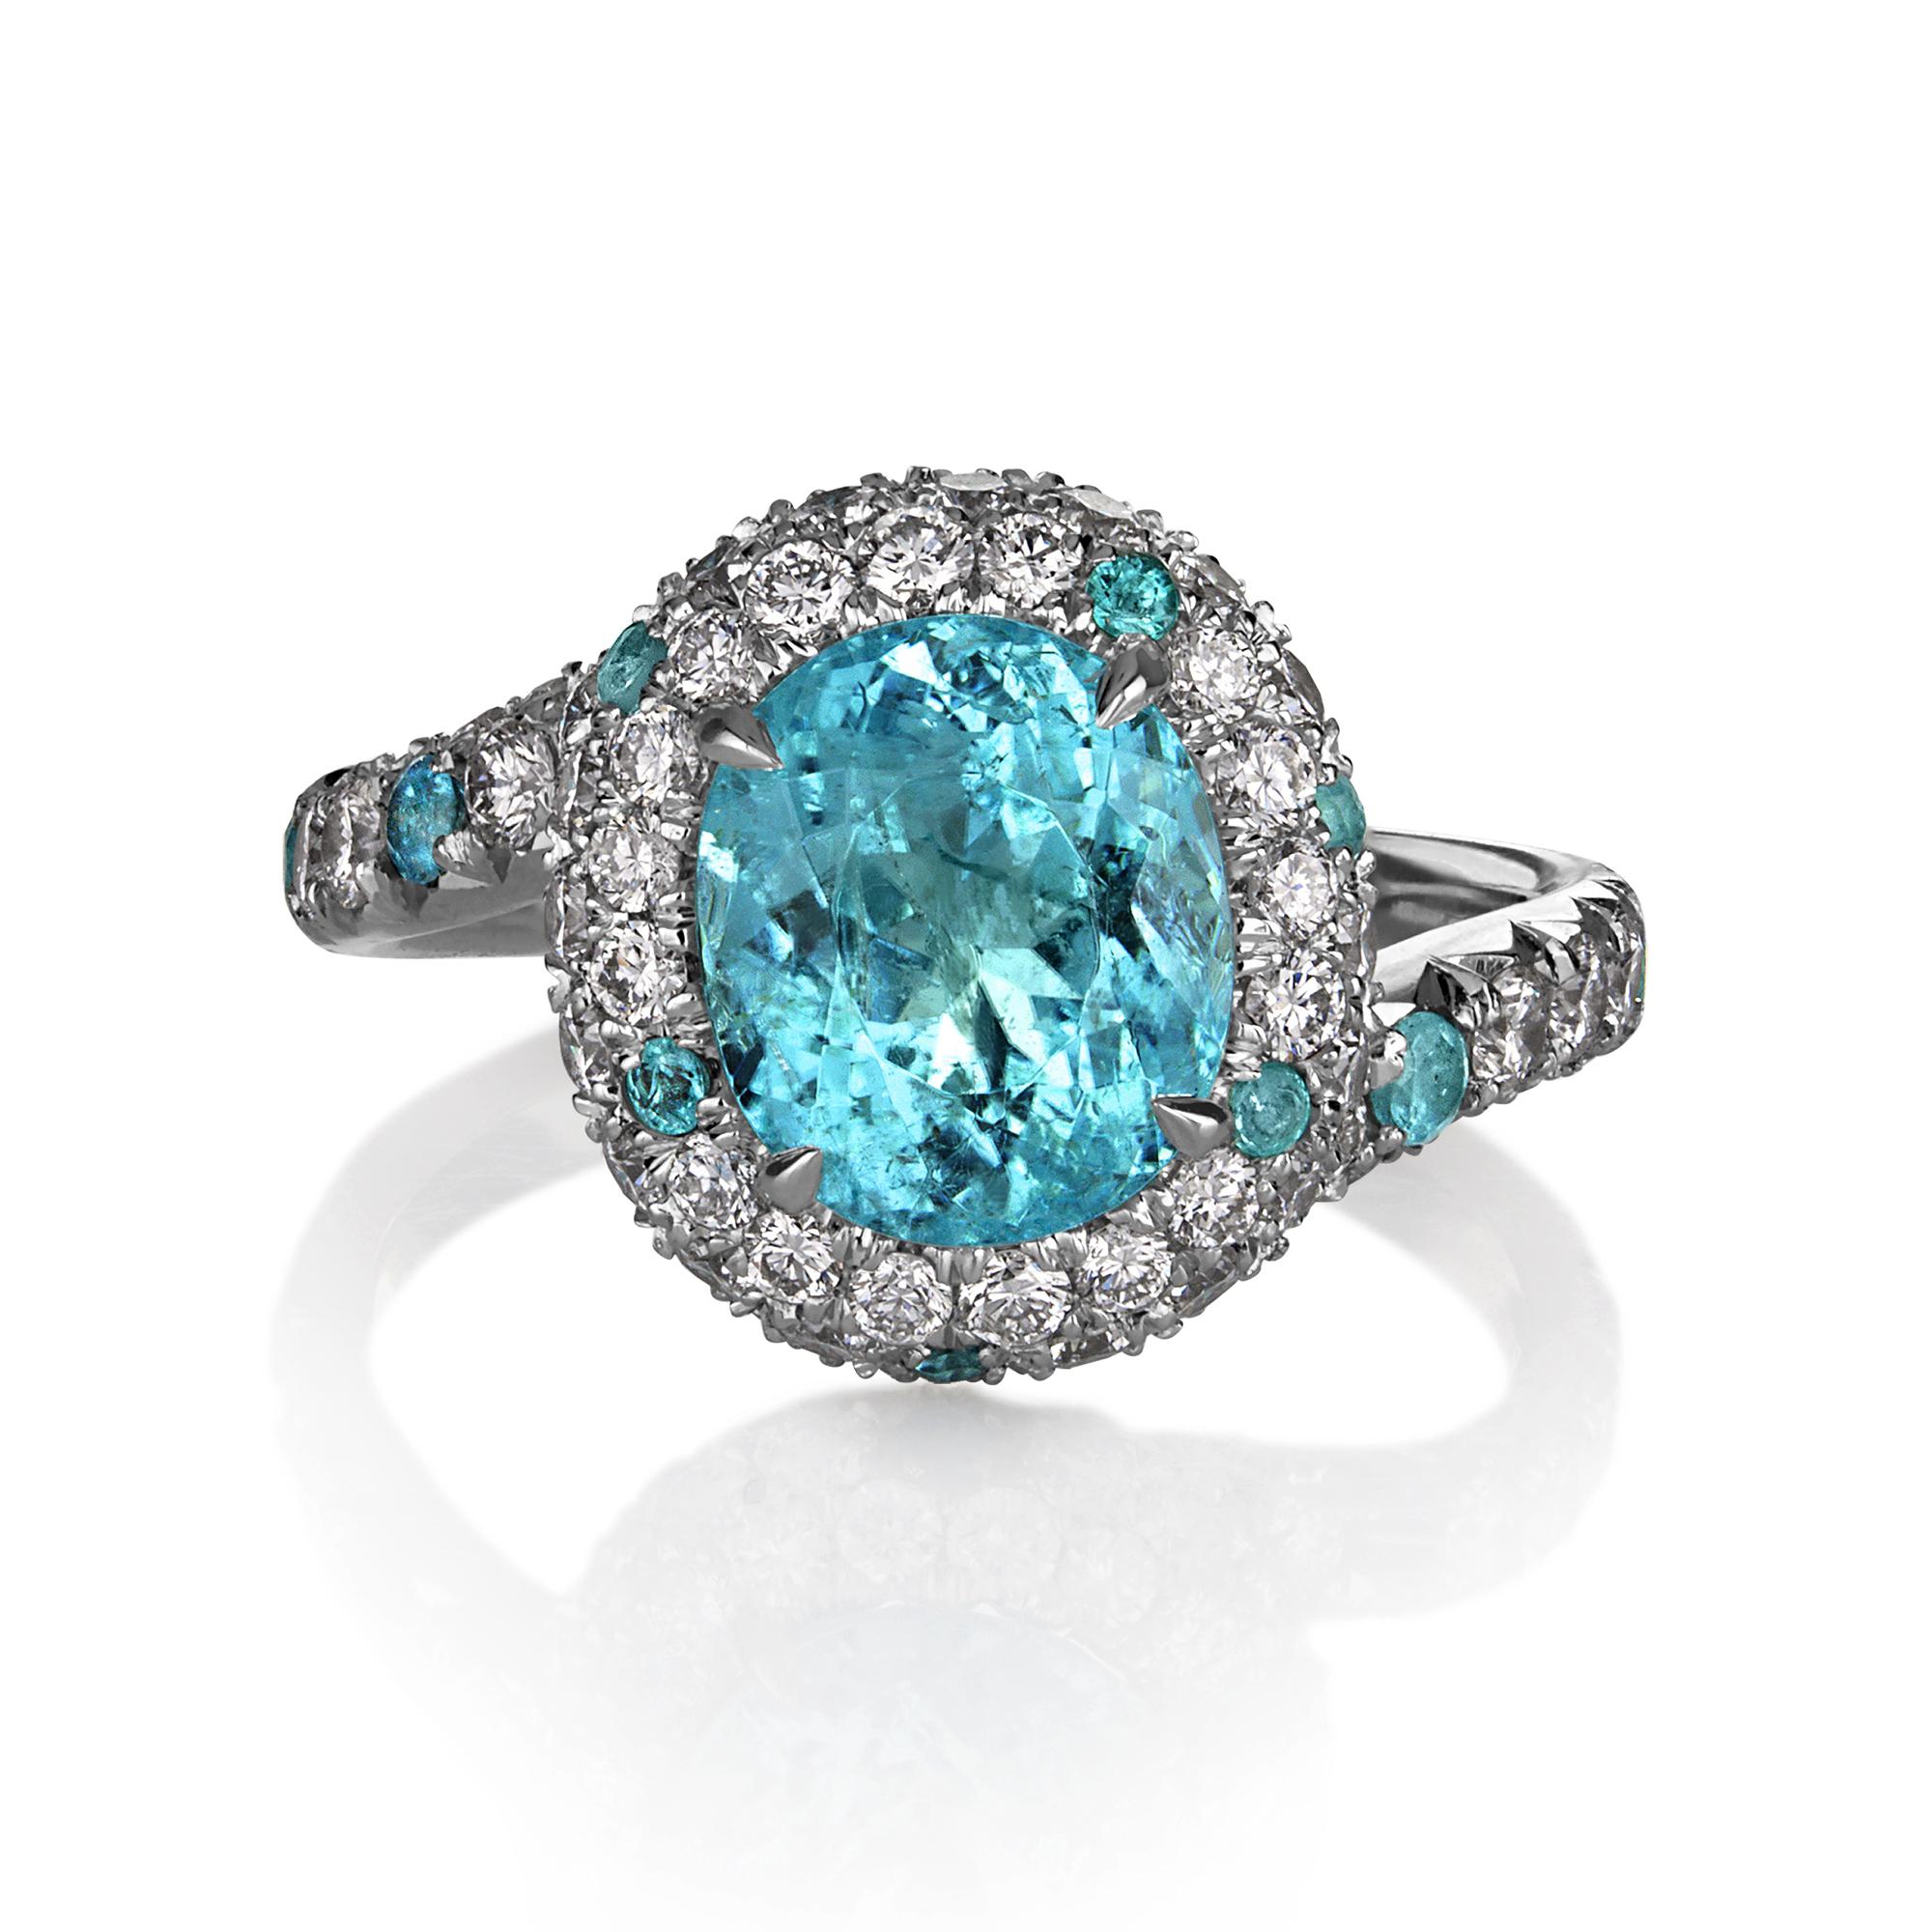 Highly collectable 4ctw Natural Paraiba Tourmaline and Diamond Platinum Ring, GIA CERTIFIED.

A high-fashion ring from another planet! This jewel will make a great addition to any GEM/jewelry collection or a perfect alternative for the Modern